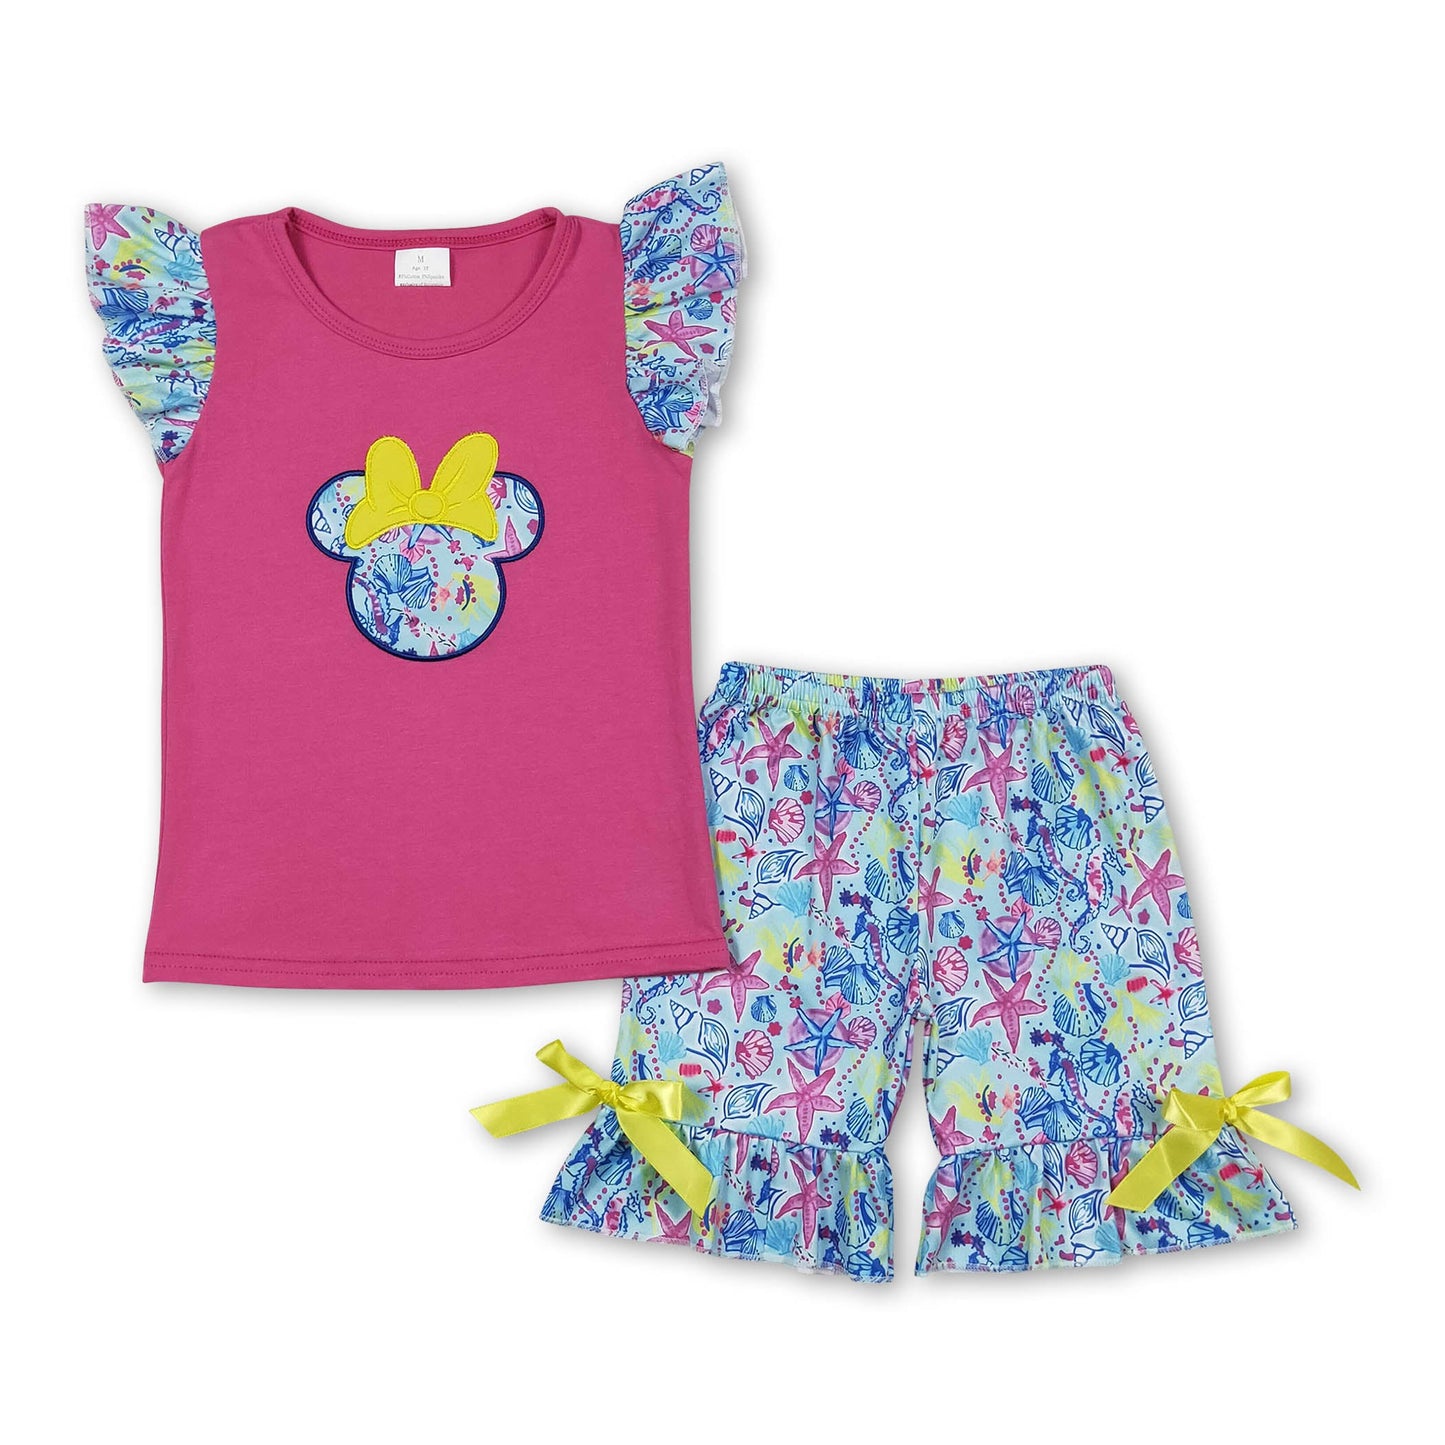 Hot pink top mouse starfish print girls summer clothes